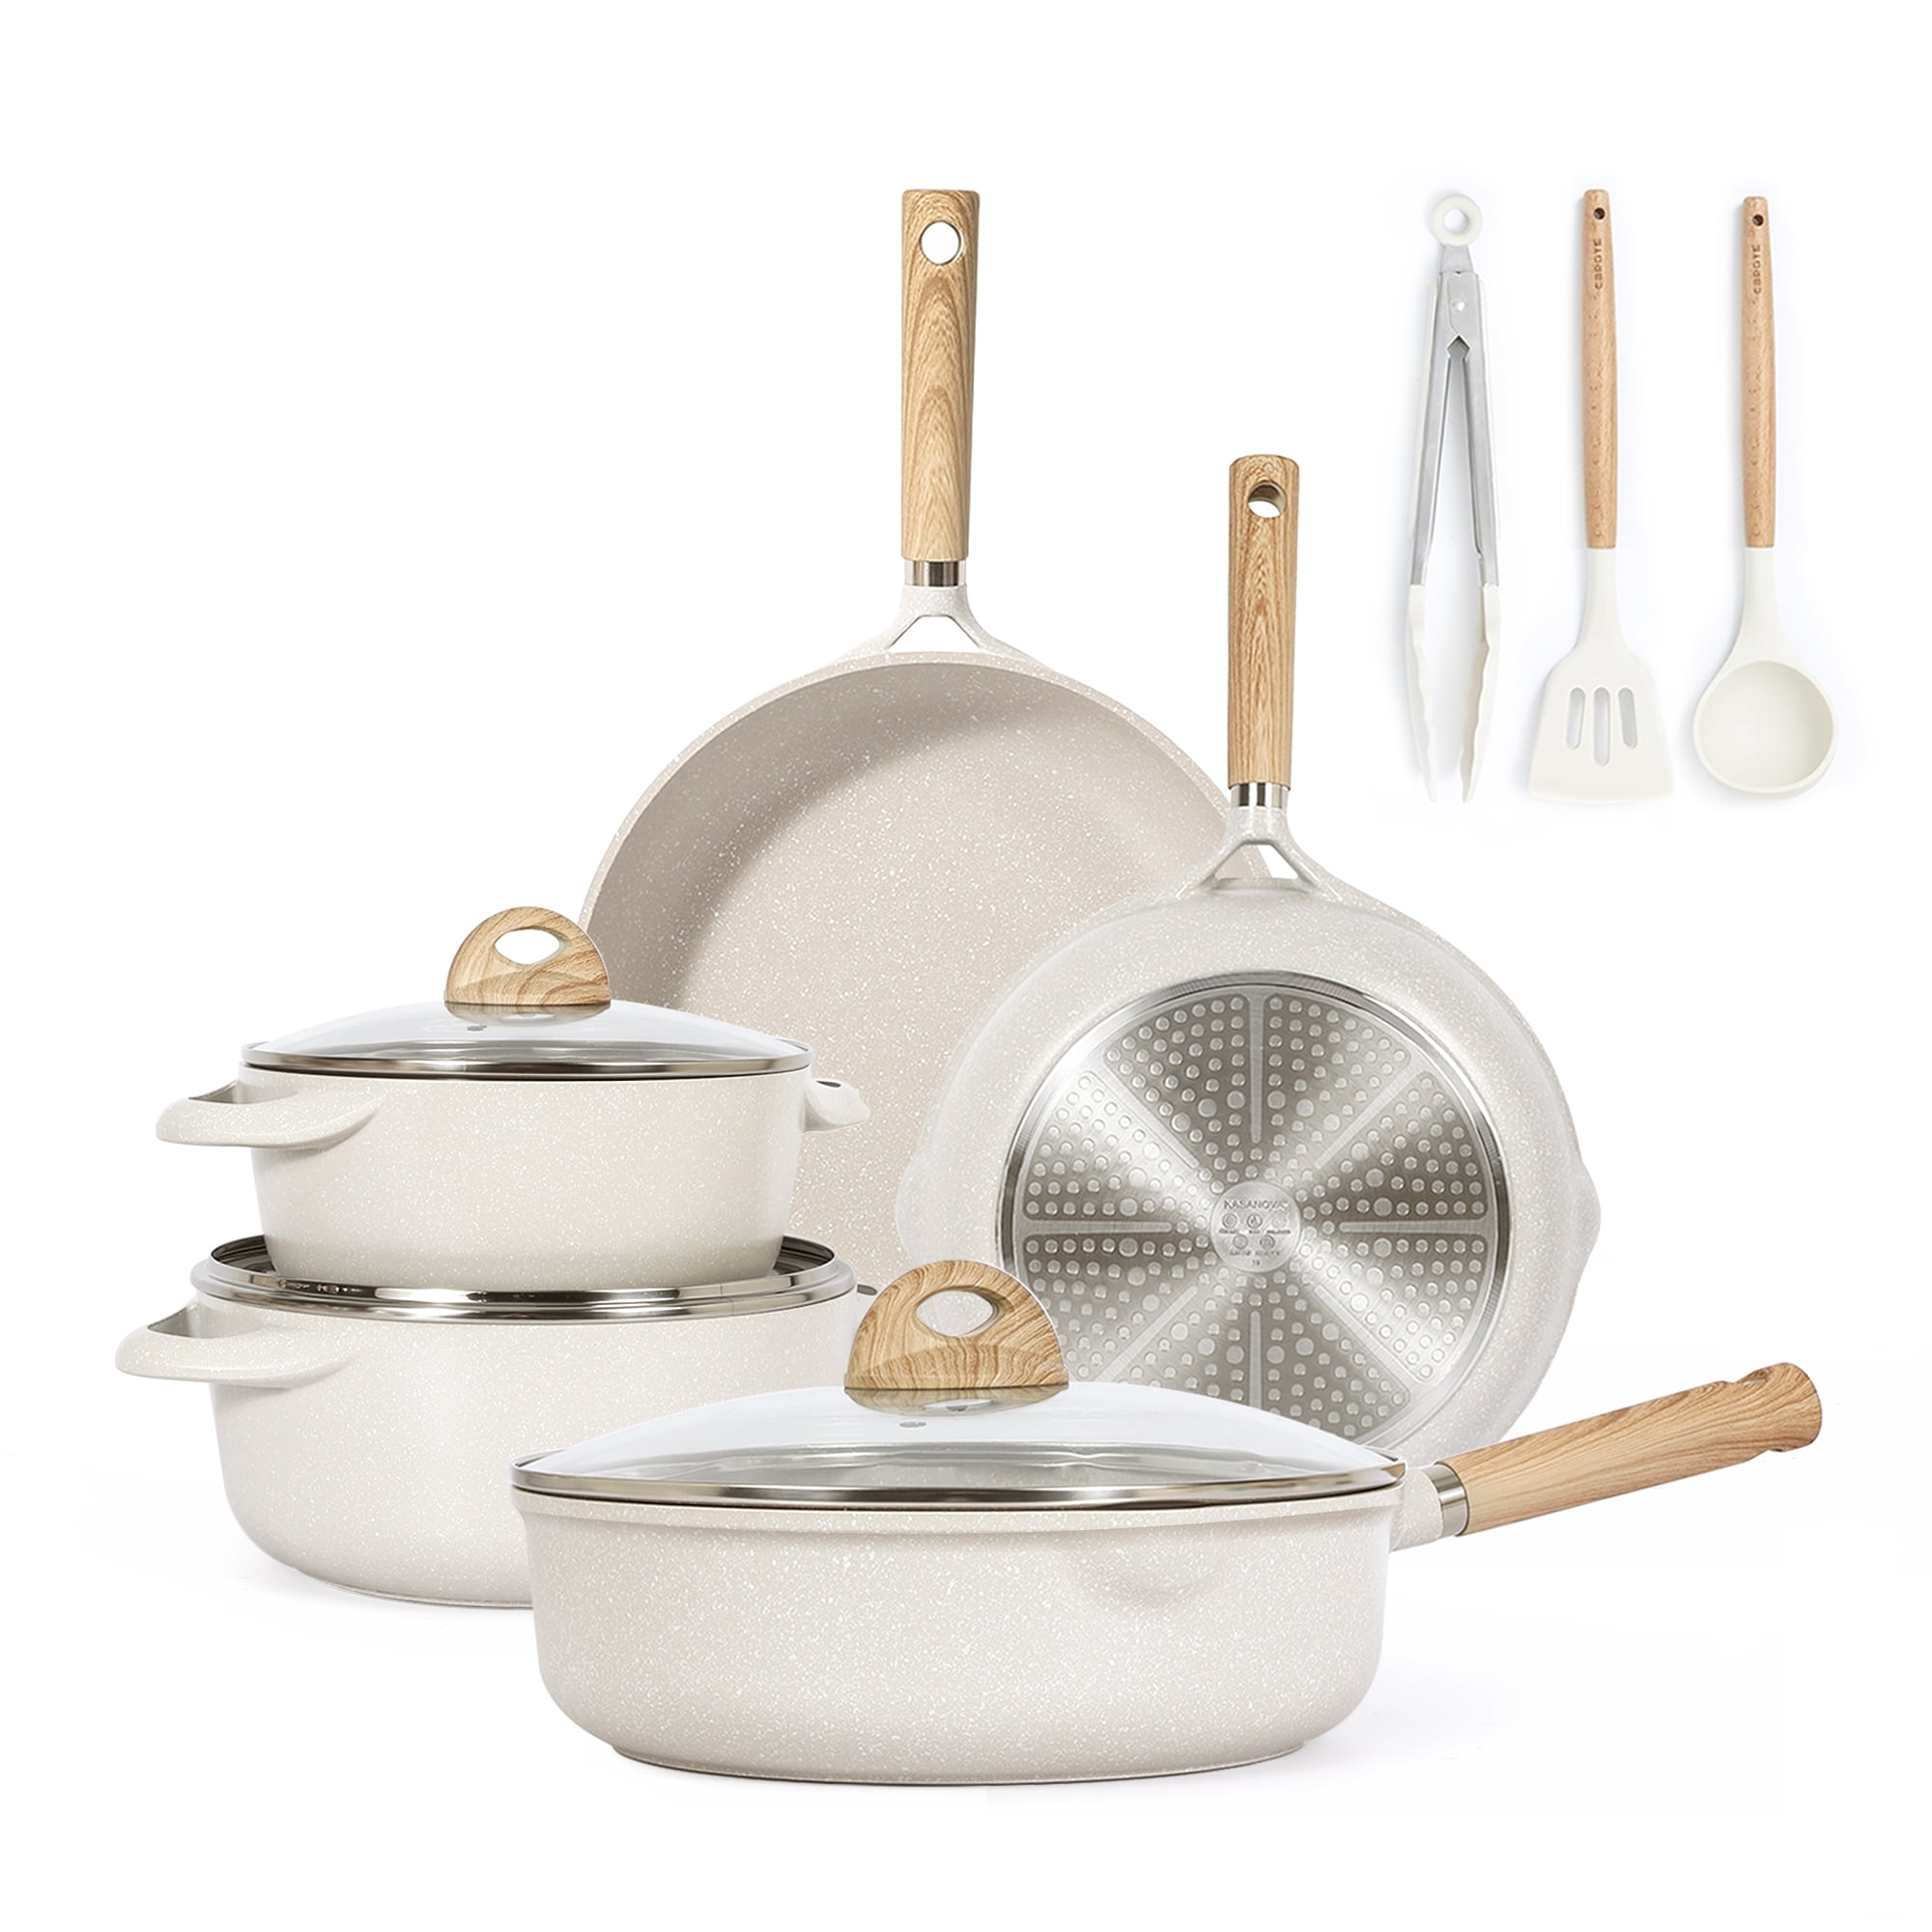 Carote Nonstick Cookware Set with Detachable Handle $39.99 (Retail $99.99)